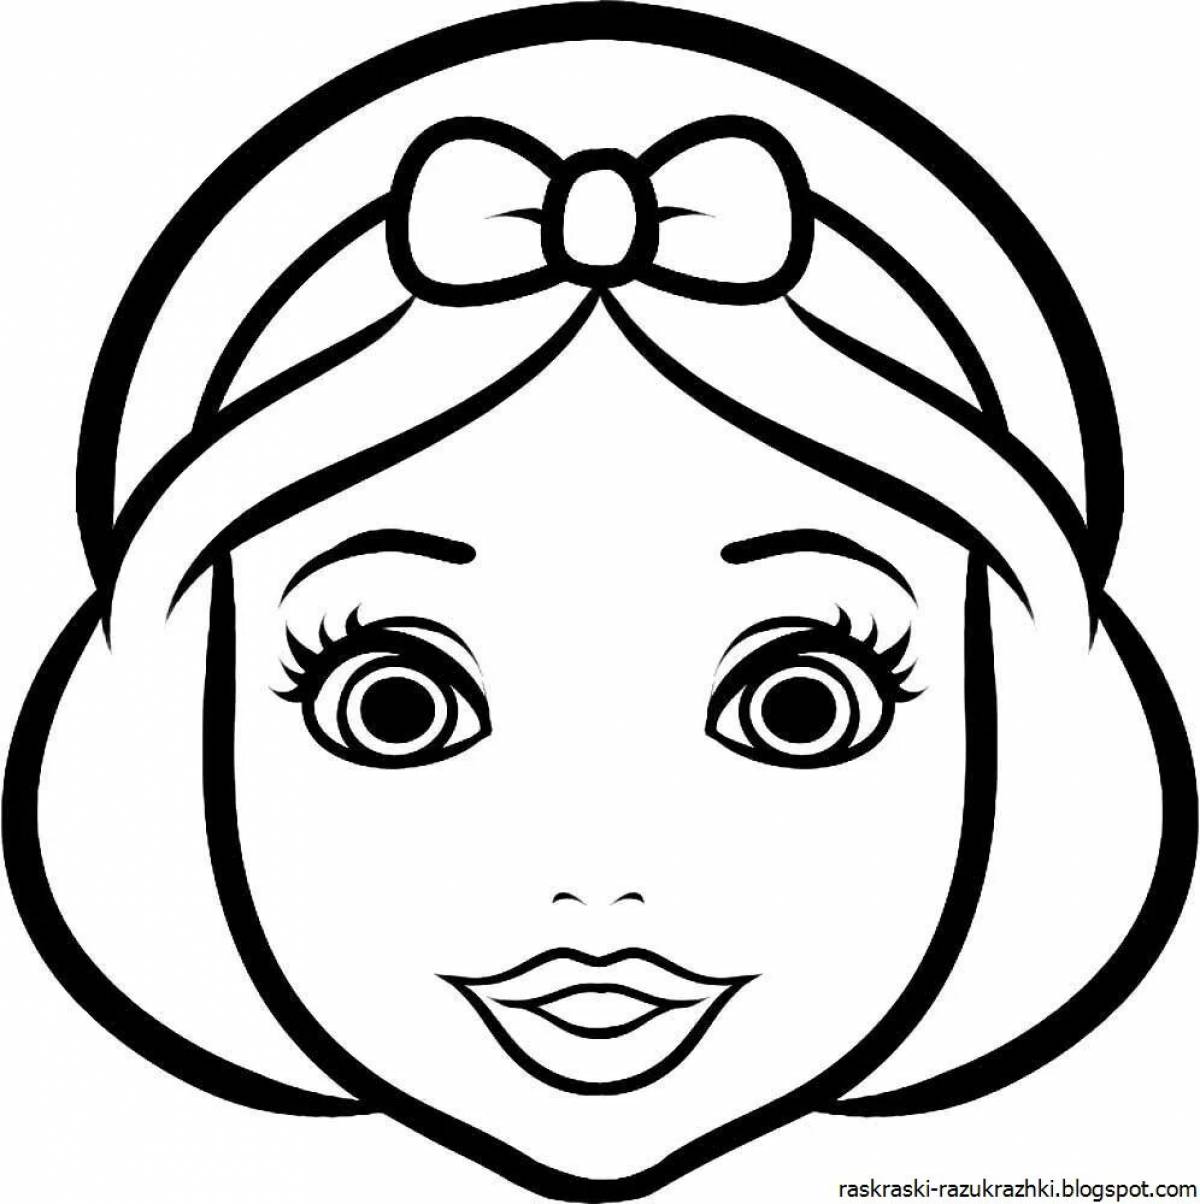 Adorable baby face coloring page for kids